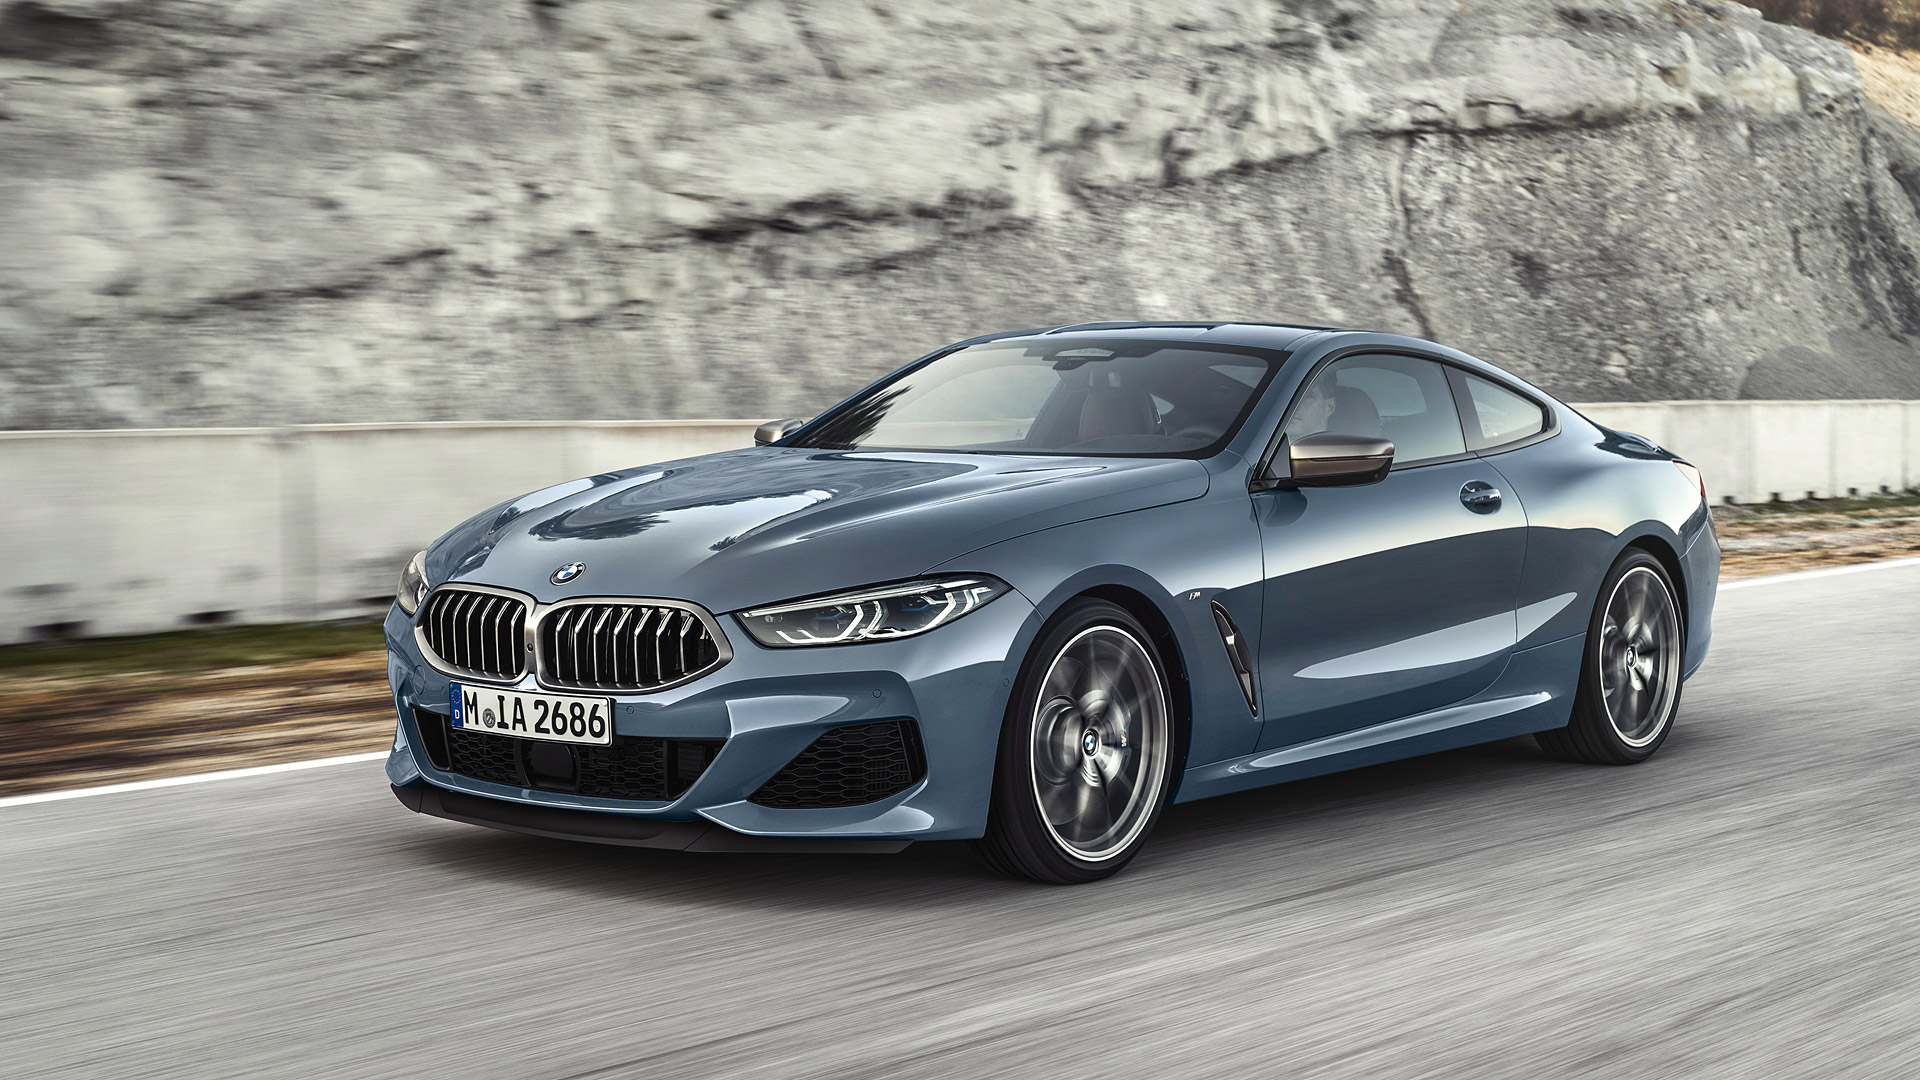 2019 BMW 8 Series Coupe Wallpapers HD Images   WSupercars 1920x1080